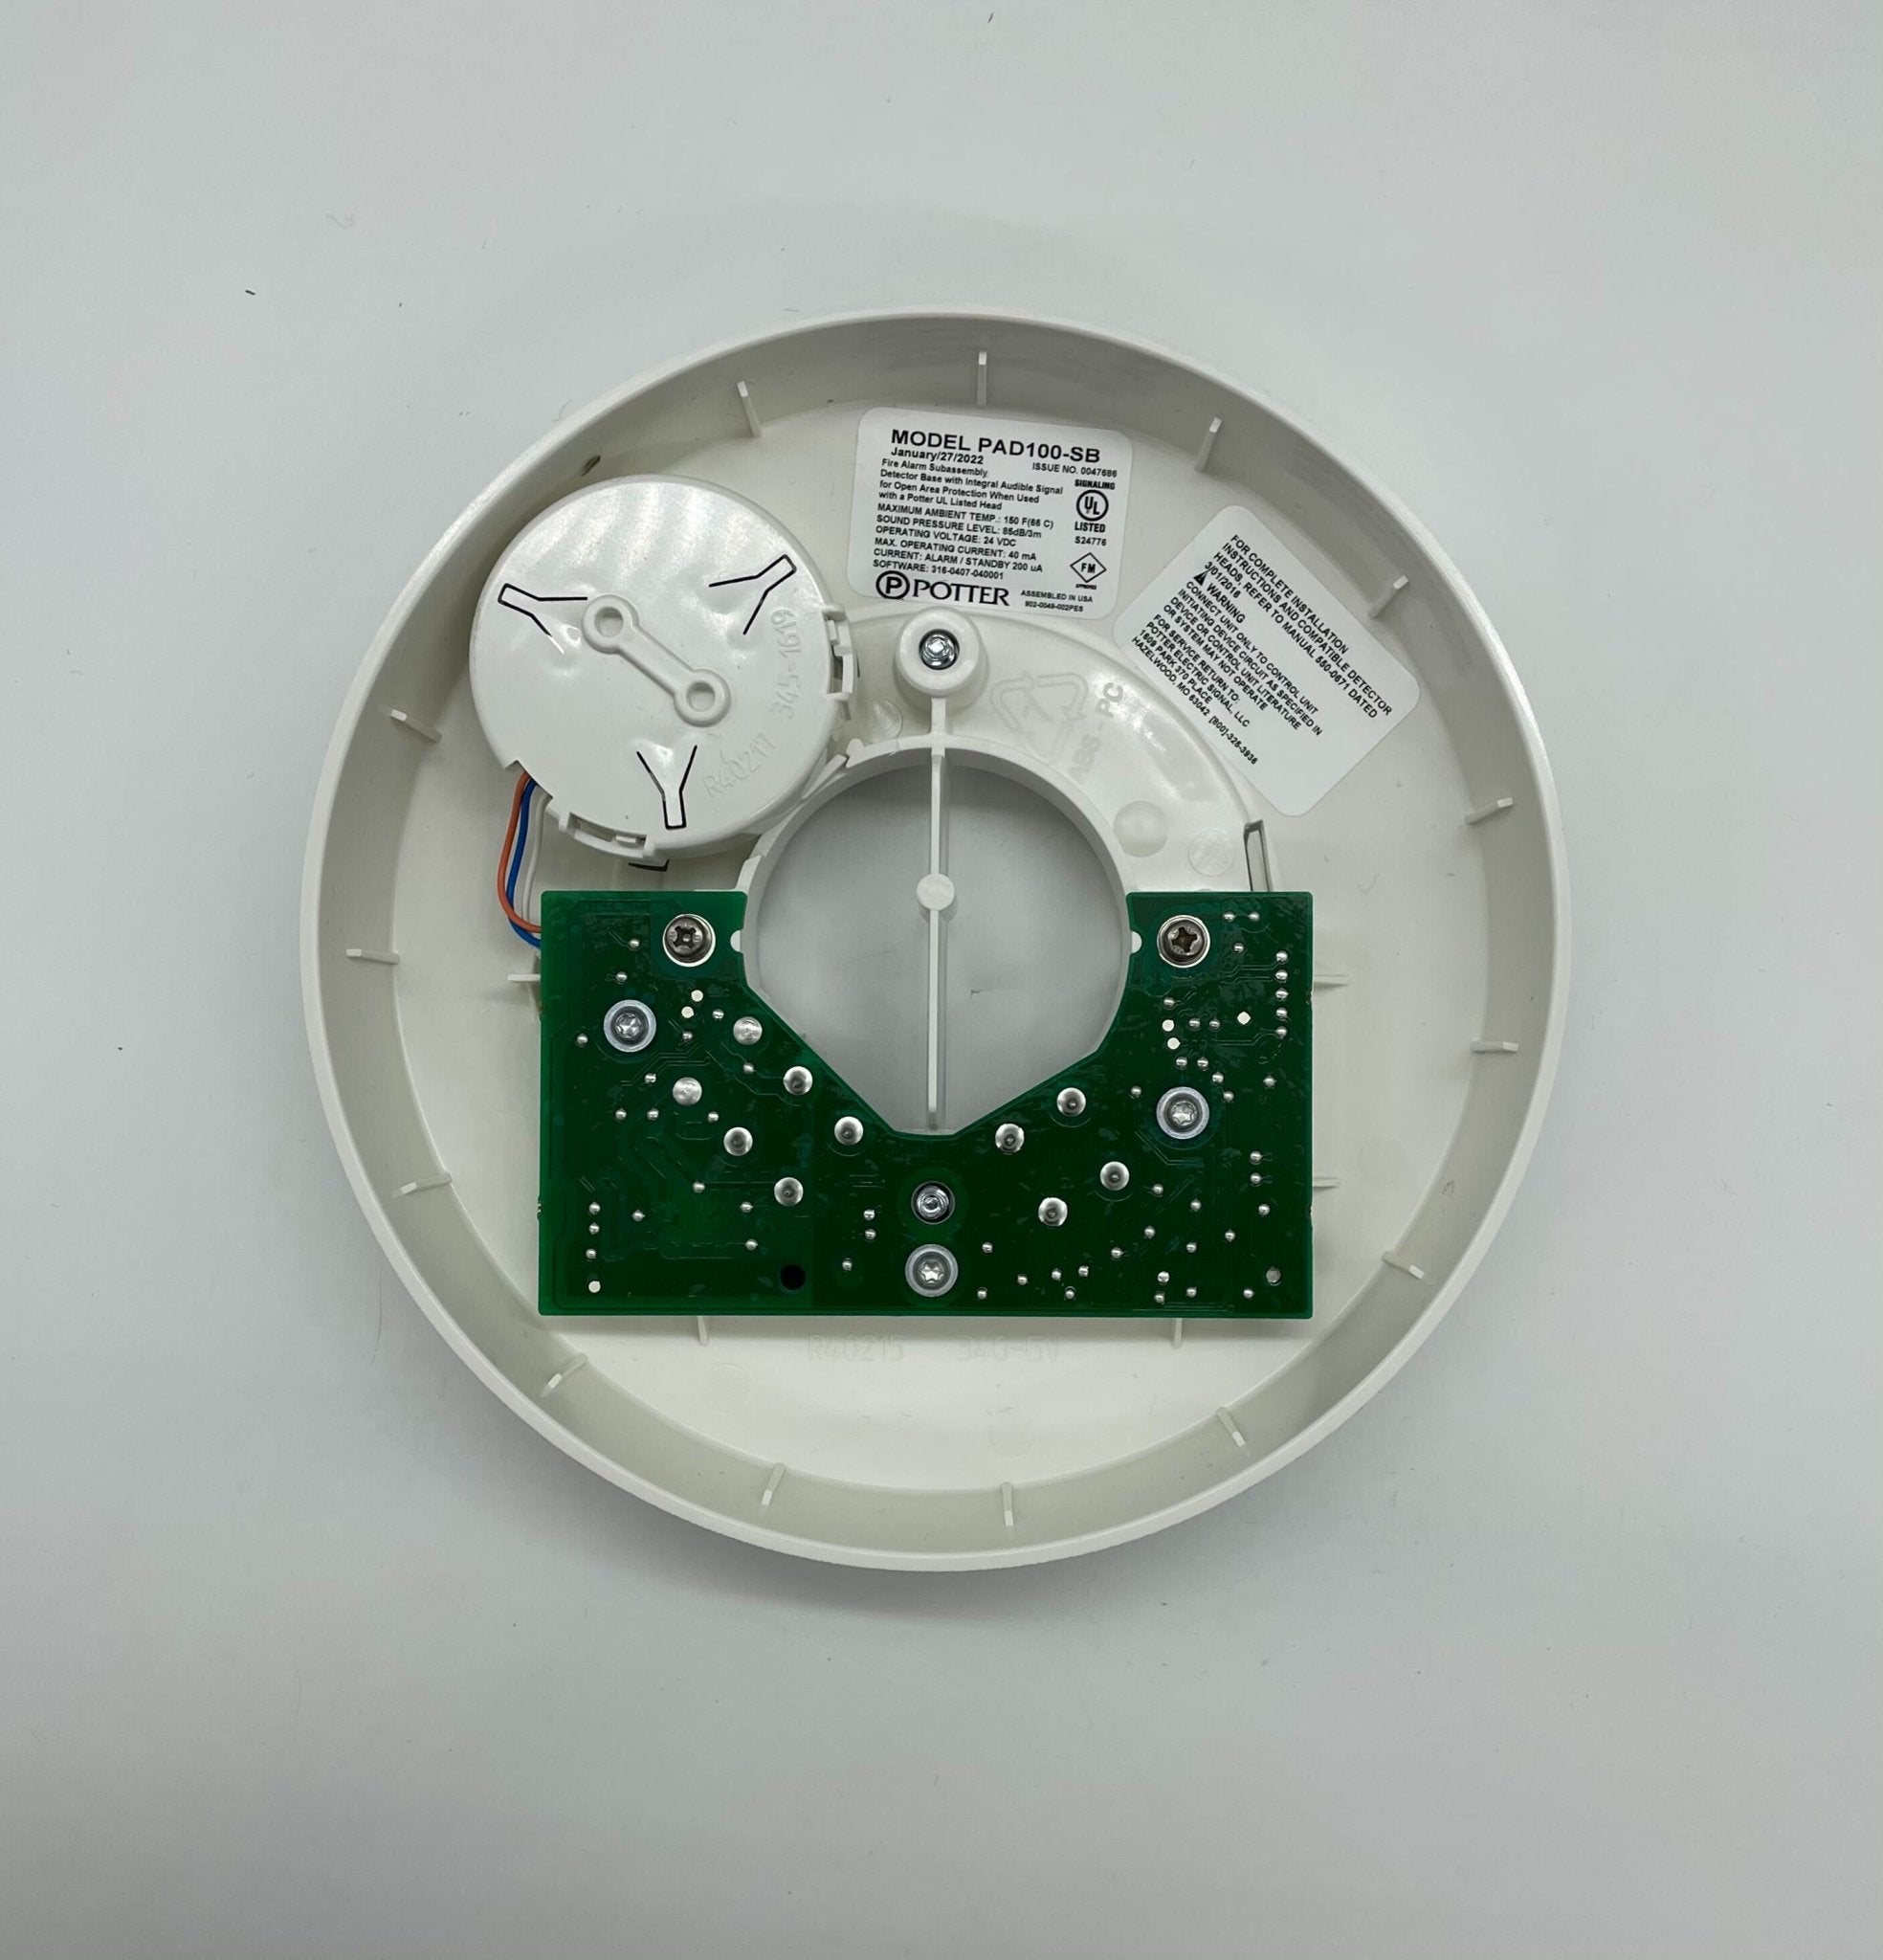 Potter PAD100-SB - The Fire Alarm Supplier